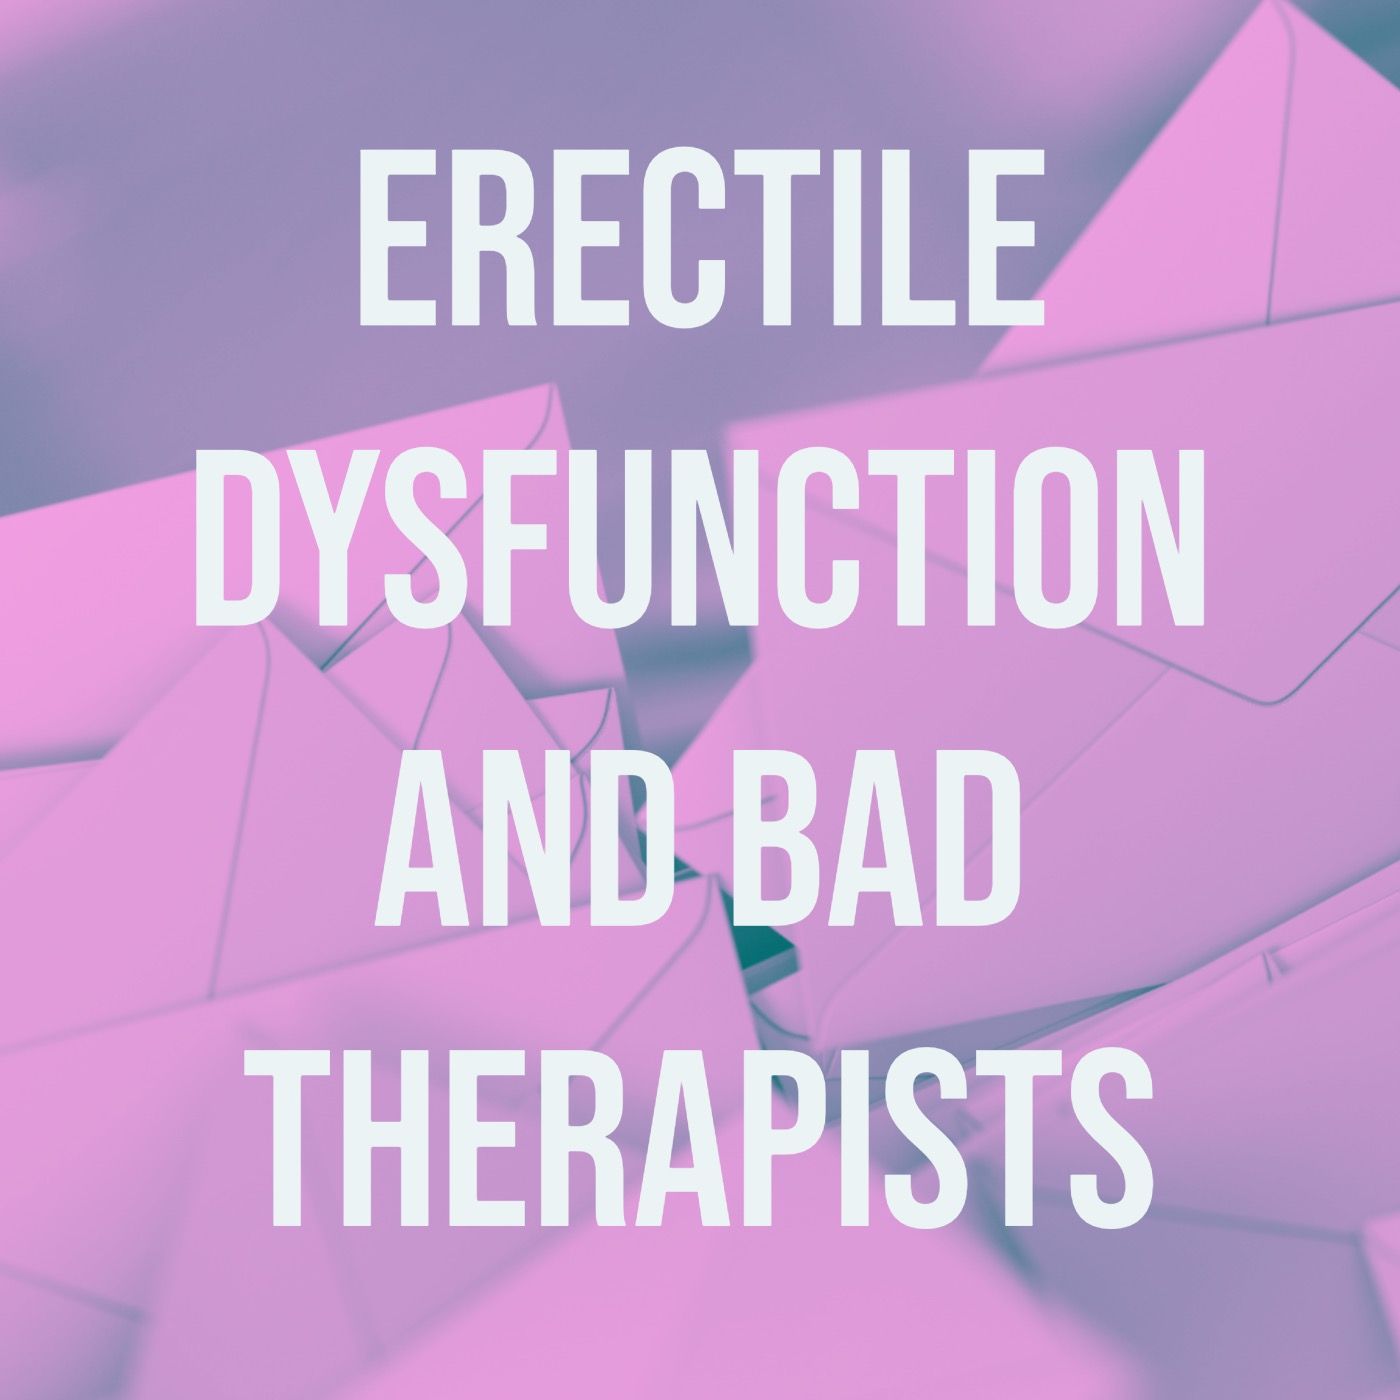 Erectile Dysfunction and Bad Therapists